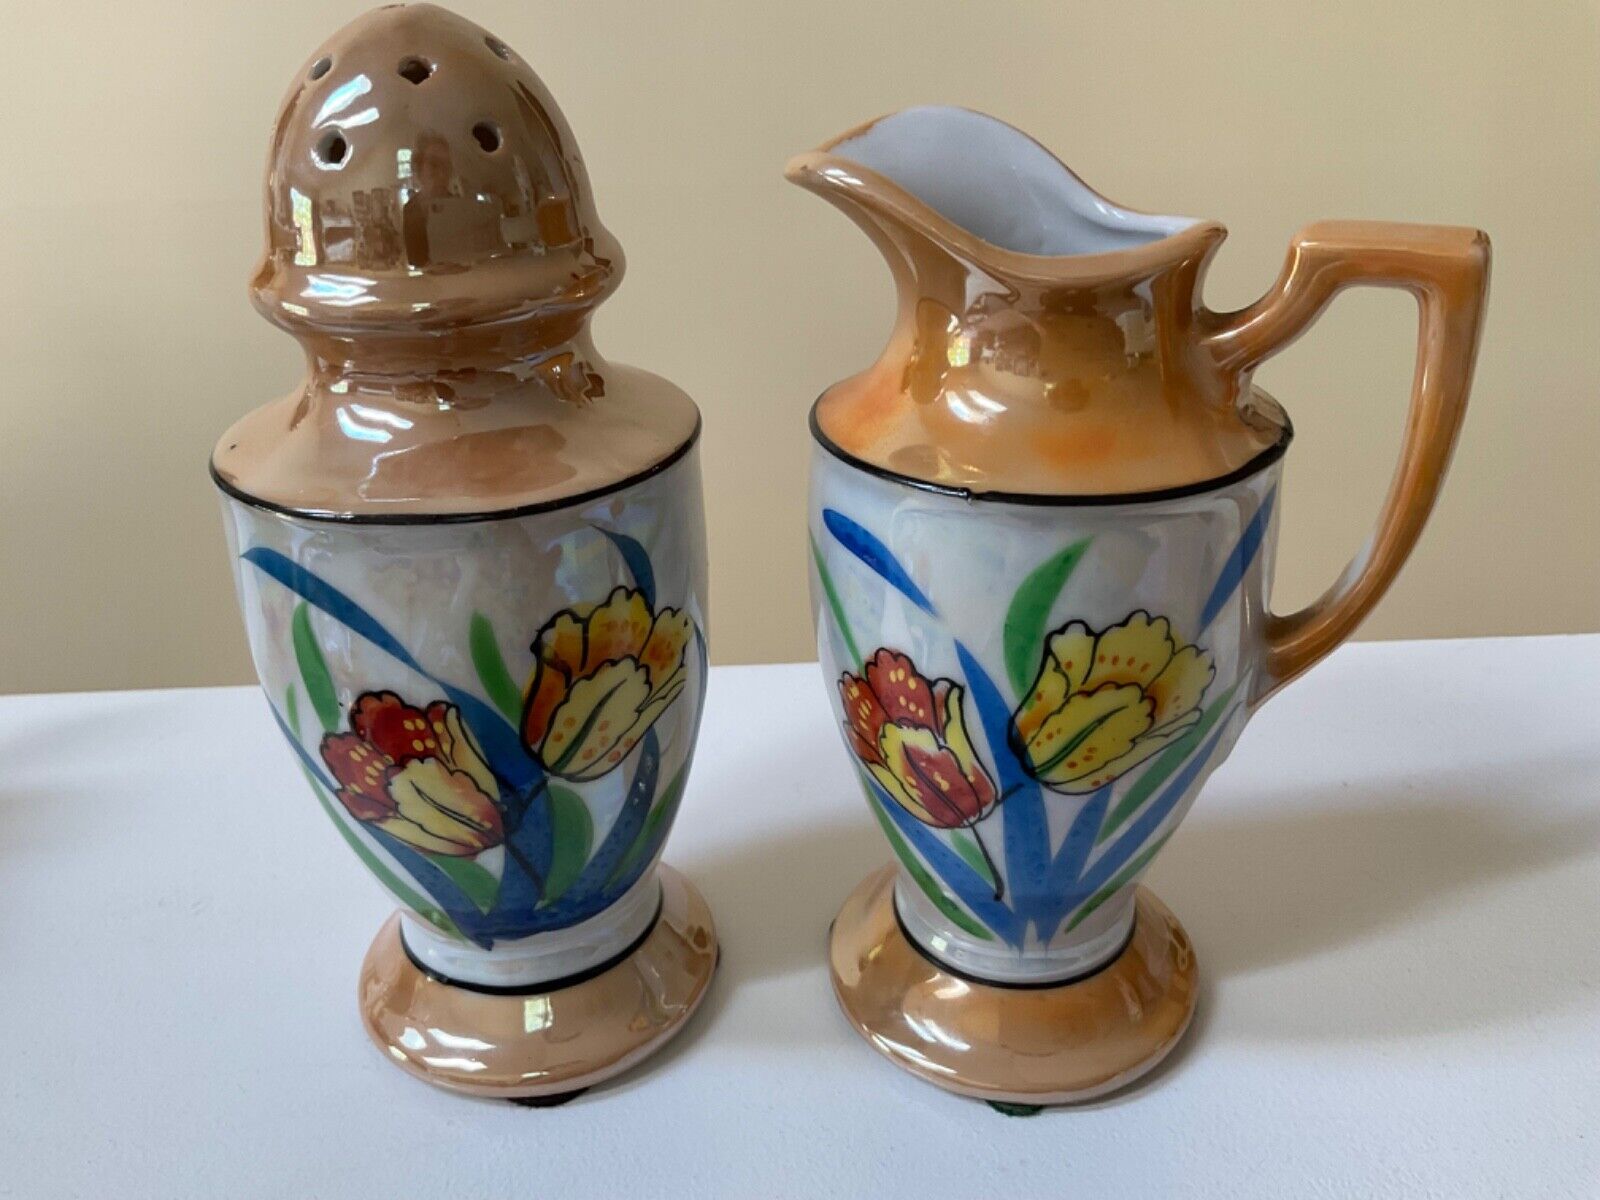 Vintage Peach Luster Hand Painted Muffineer or Sugar Shaker & Pitcher set